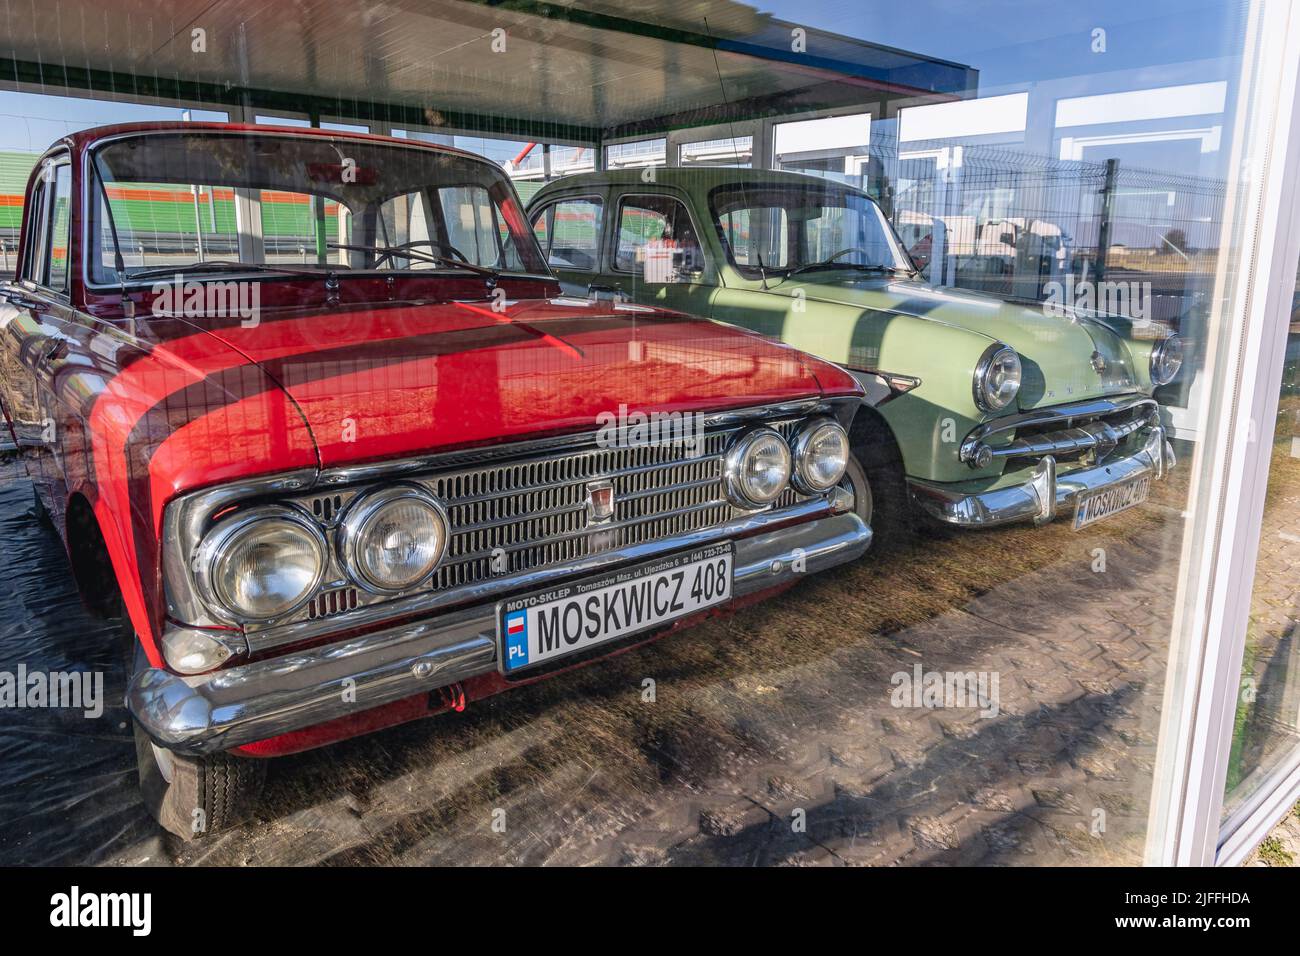 Moskvitch 408 and Moskvitch 407 cars on a permanent exhibition of classic car on a Moya gas station on a S8 expressway near Rawa Mazowiecka, Poland Stock Photo